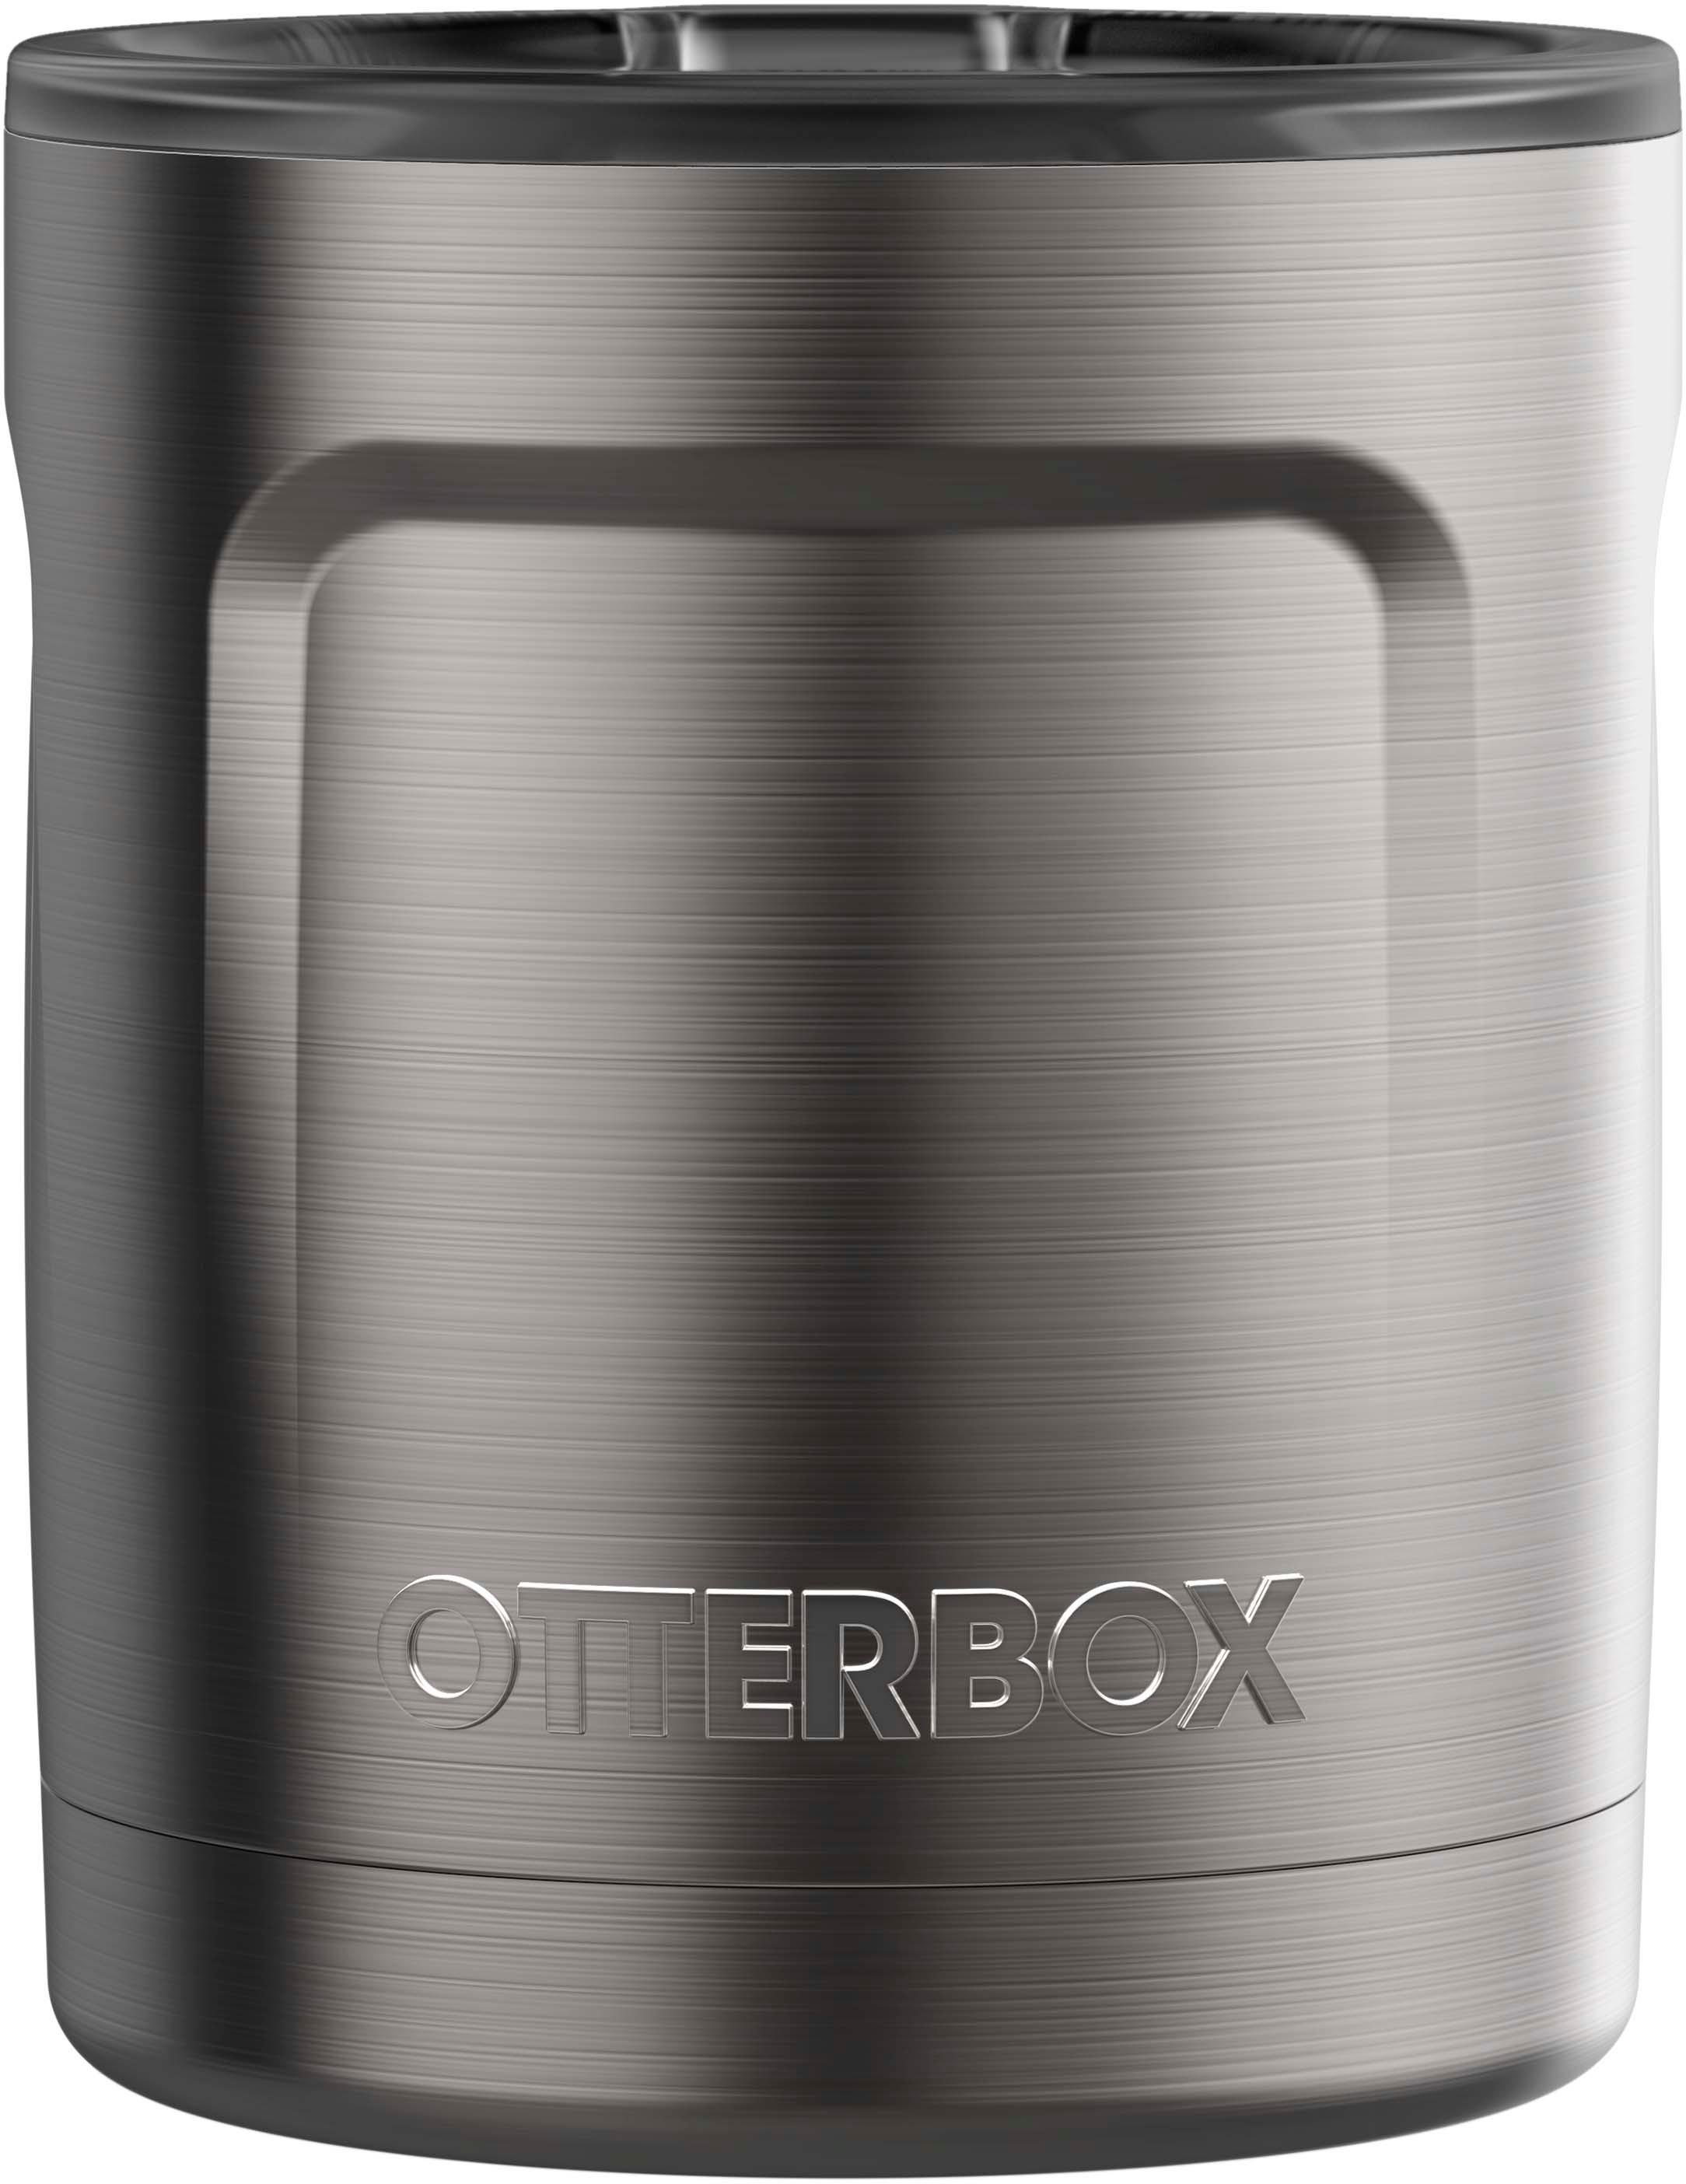 OtterBox - Elevation 10 Tumbler - Stainless Steel